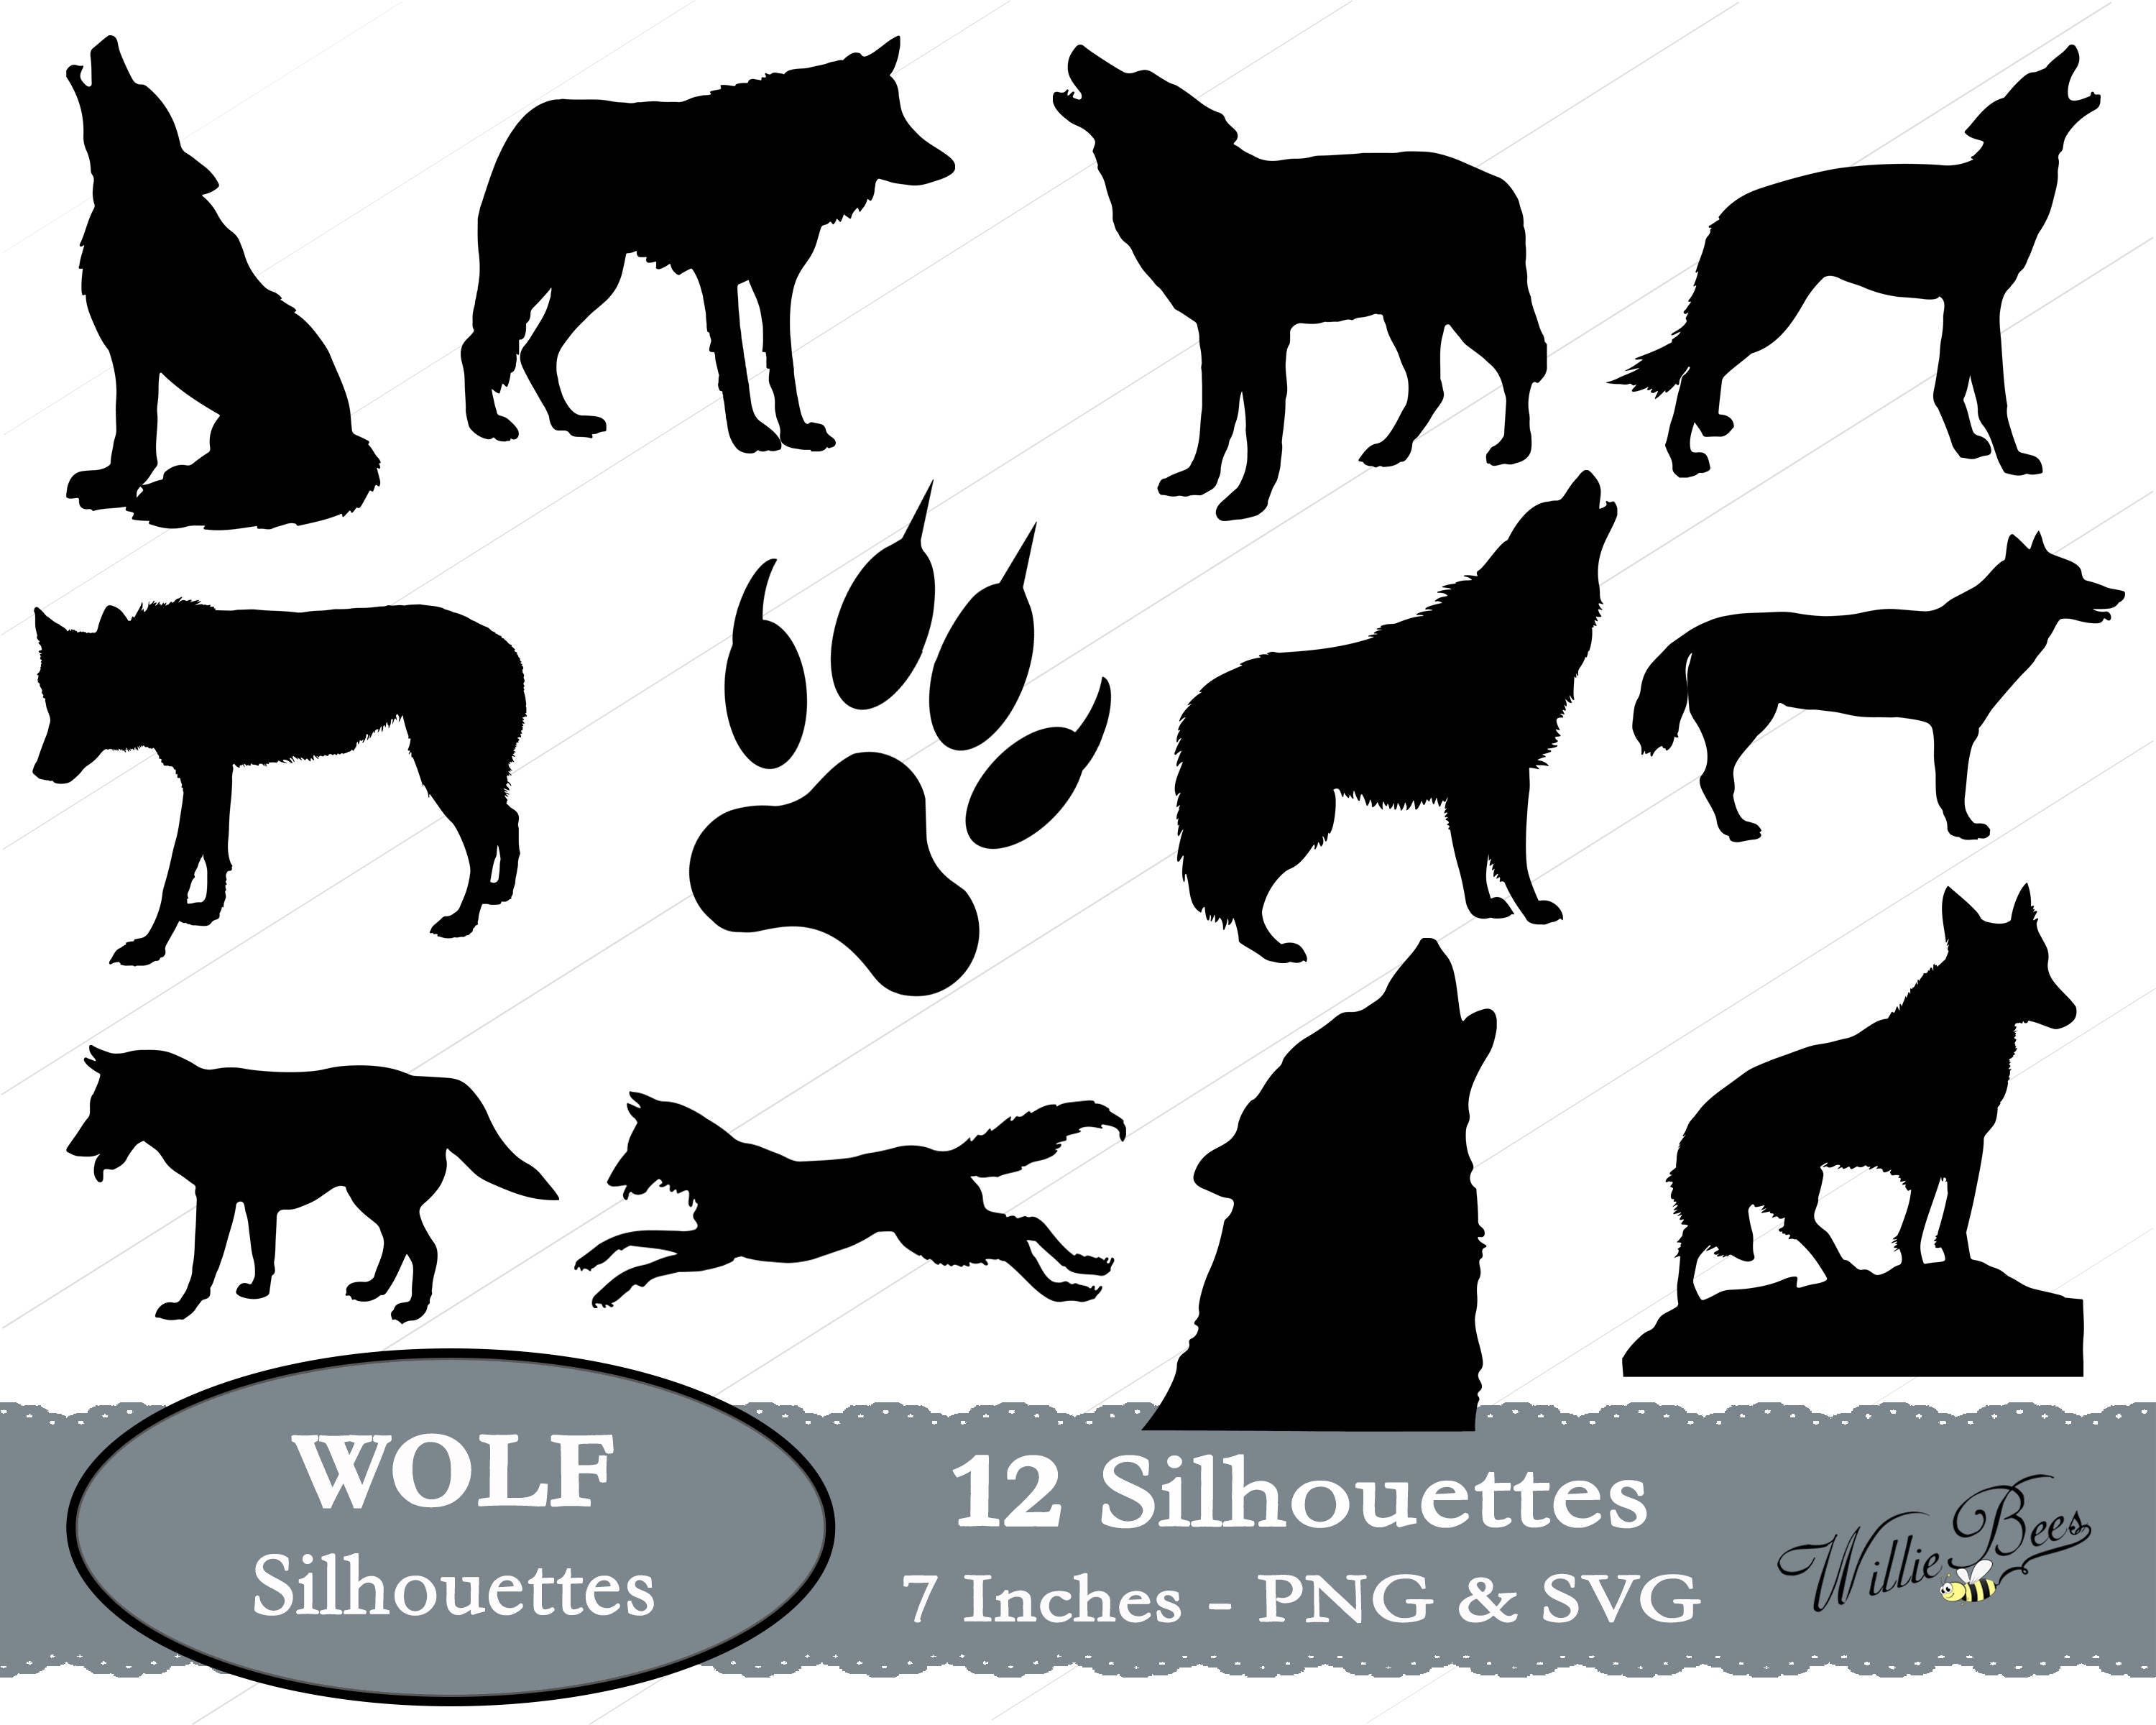 Download Wolf SVG Wolf Silhouette Clip Art Wolves Timber Wolf Grey